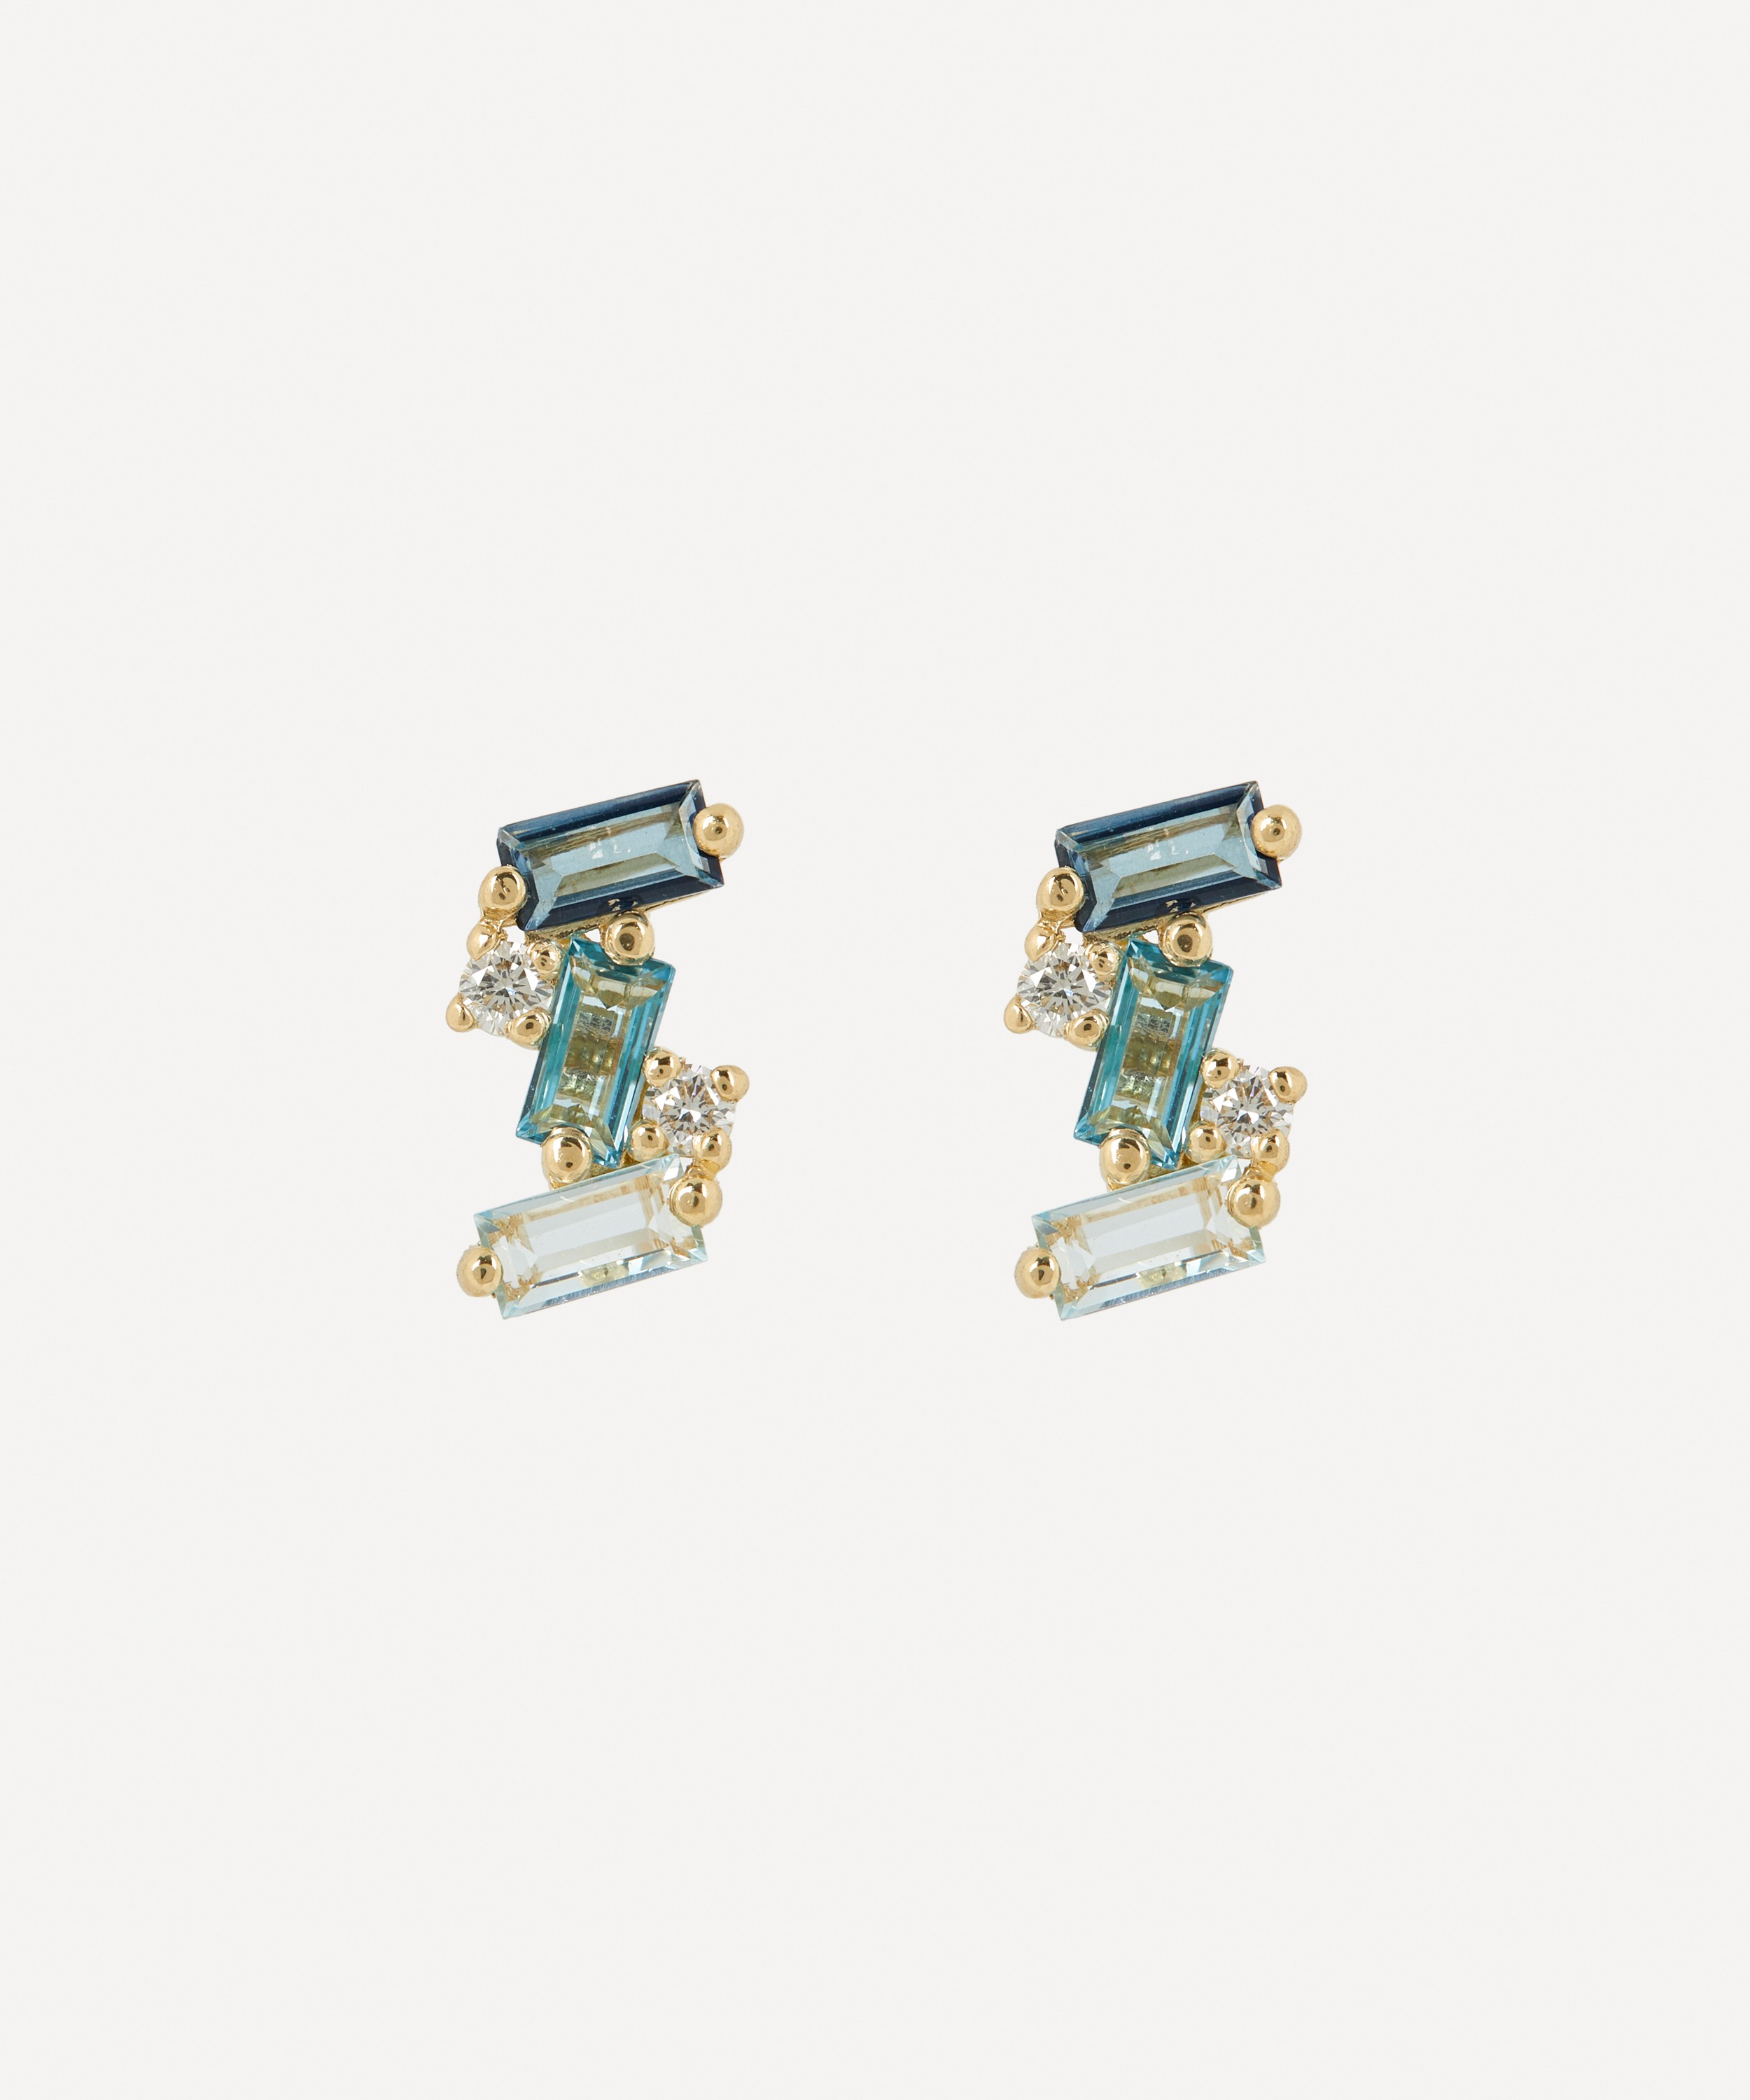 Suzanne Kalan - 14ct Gold Diamond And Blue Topaz Baguette Stud Earrings